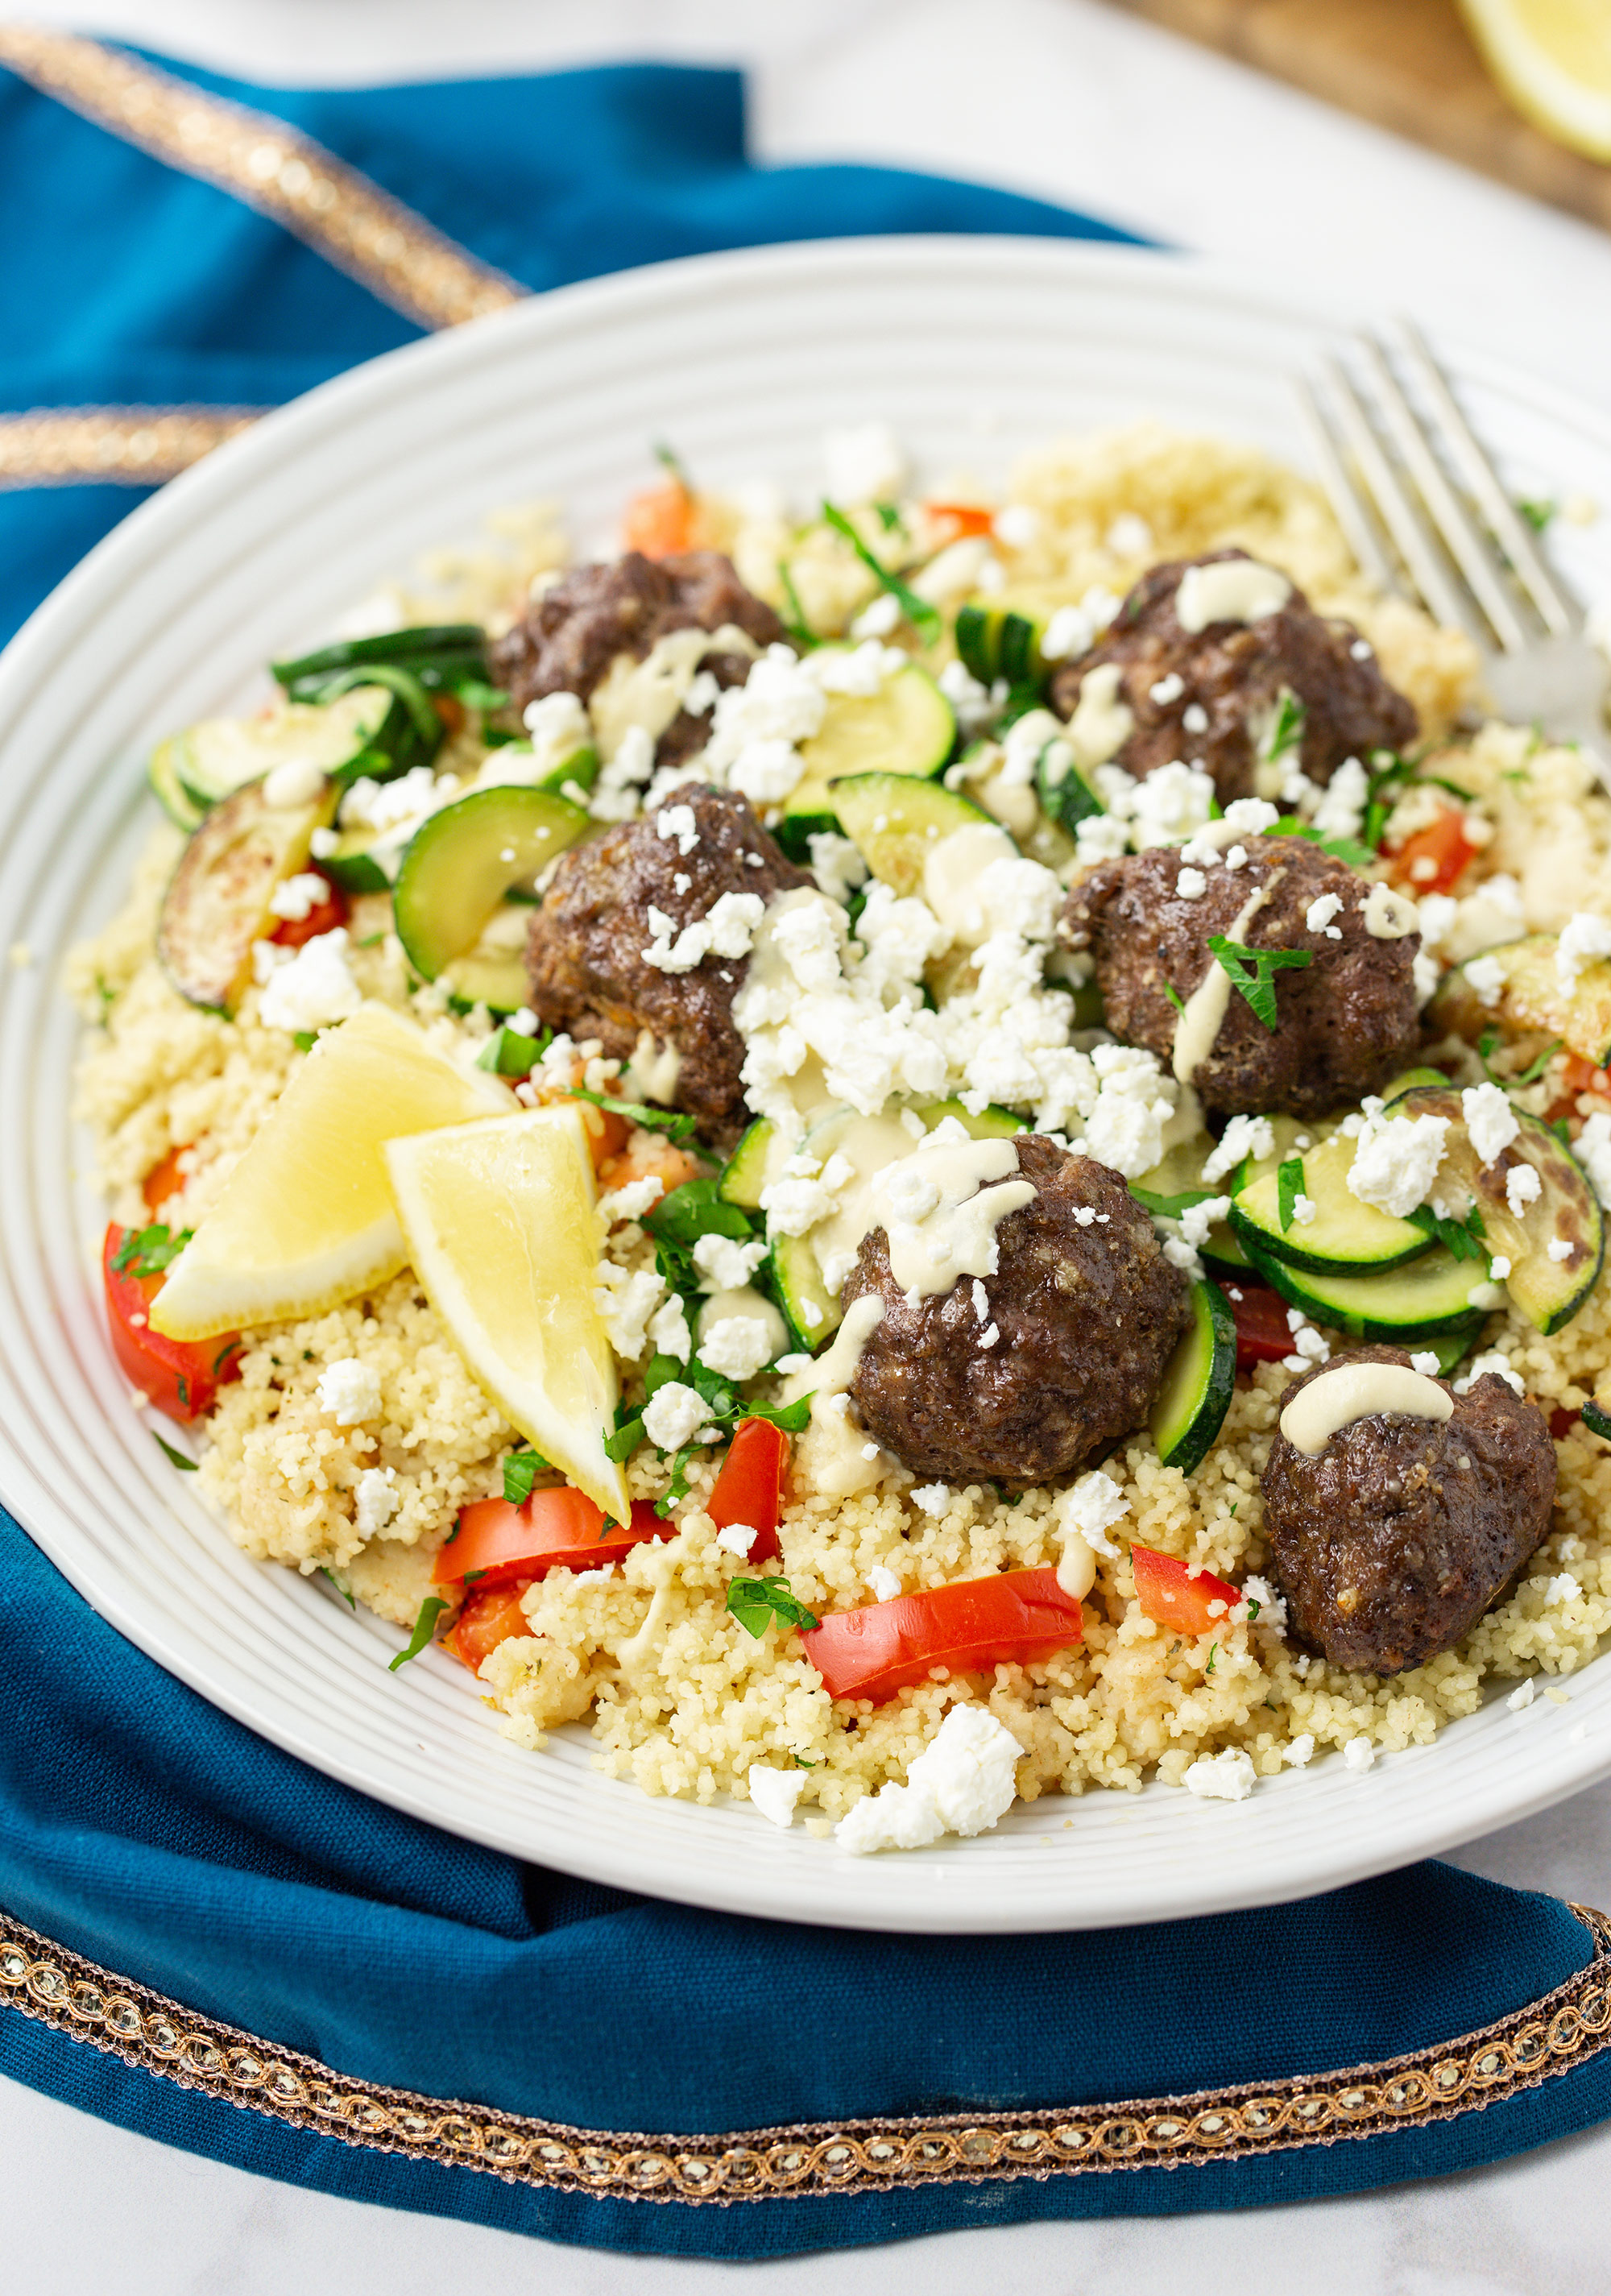 Lebanese Beef & Feta Meatballs with Zucchini, Couscous Tabbouleh and Hummus Drizzle